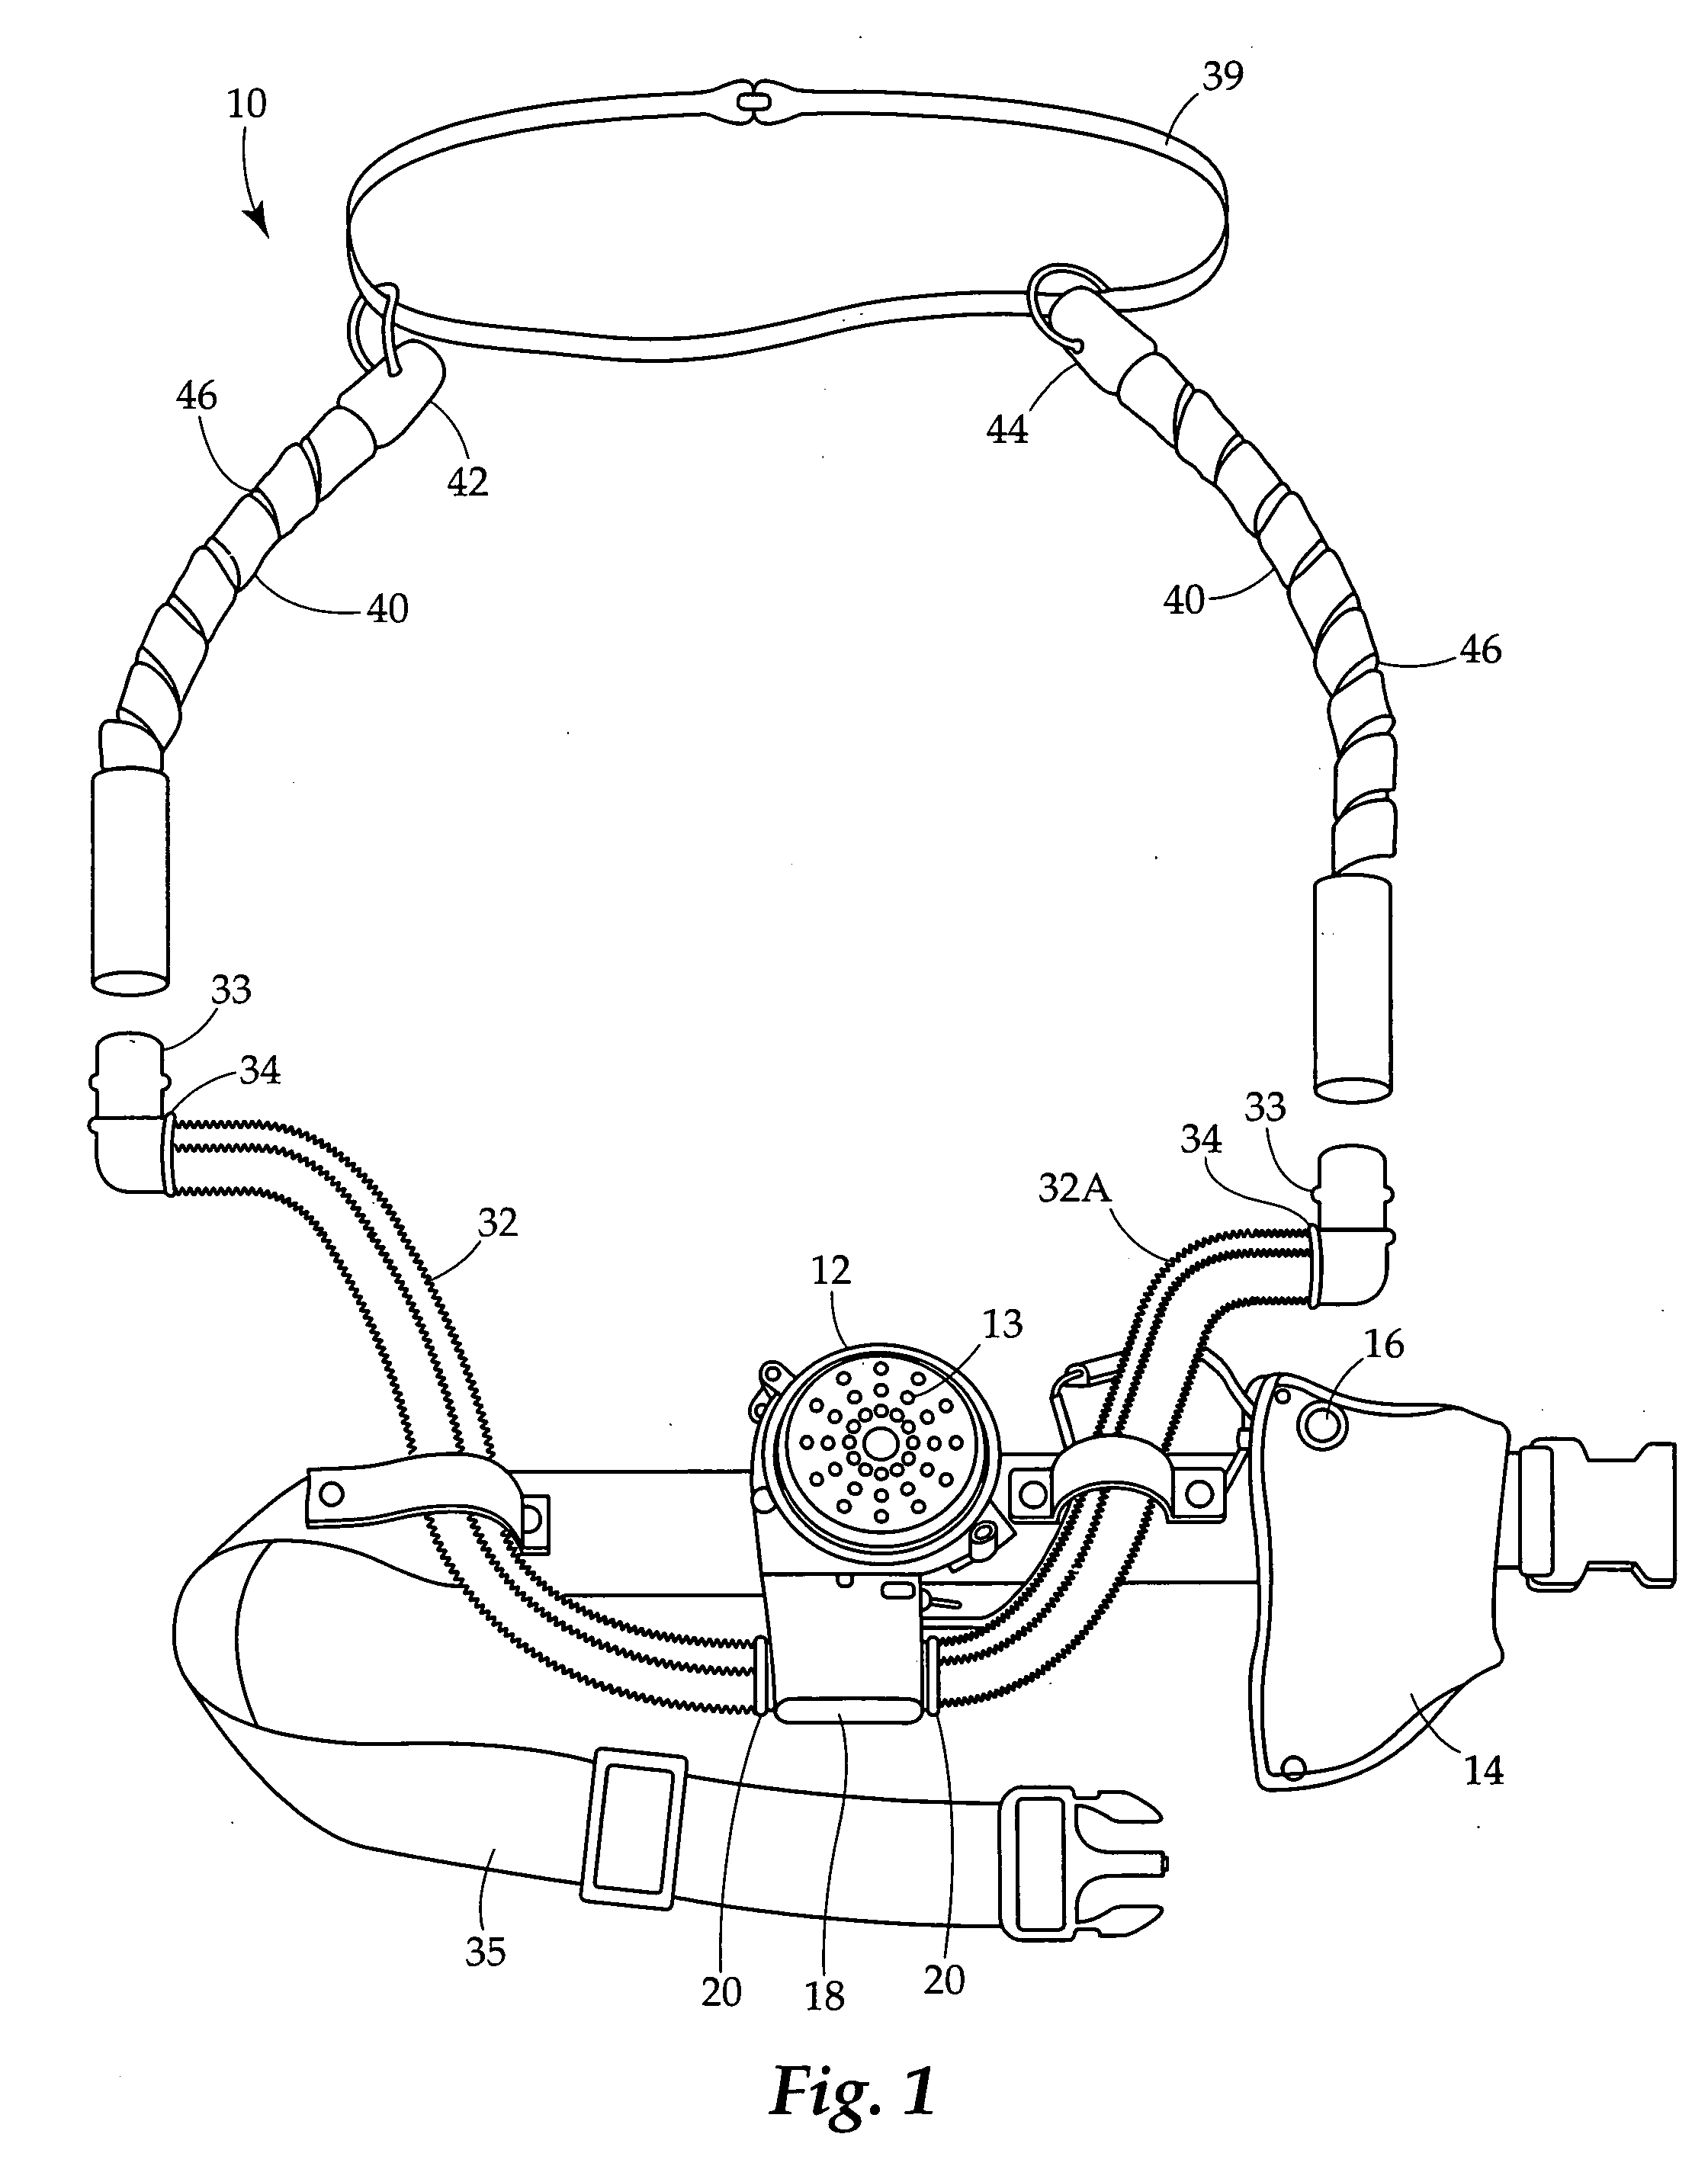 Air distribution system for individual cooling